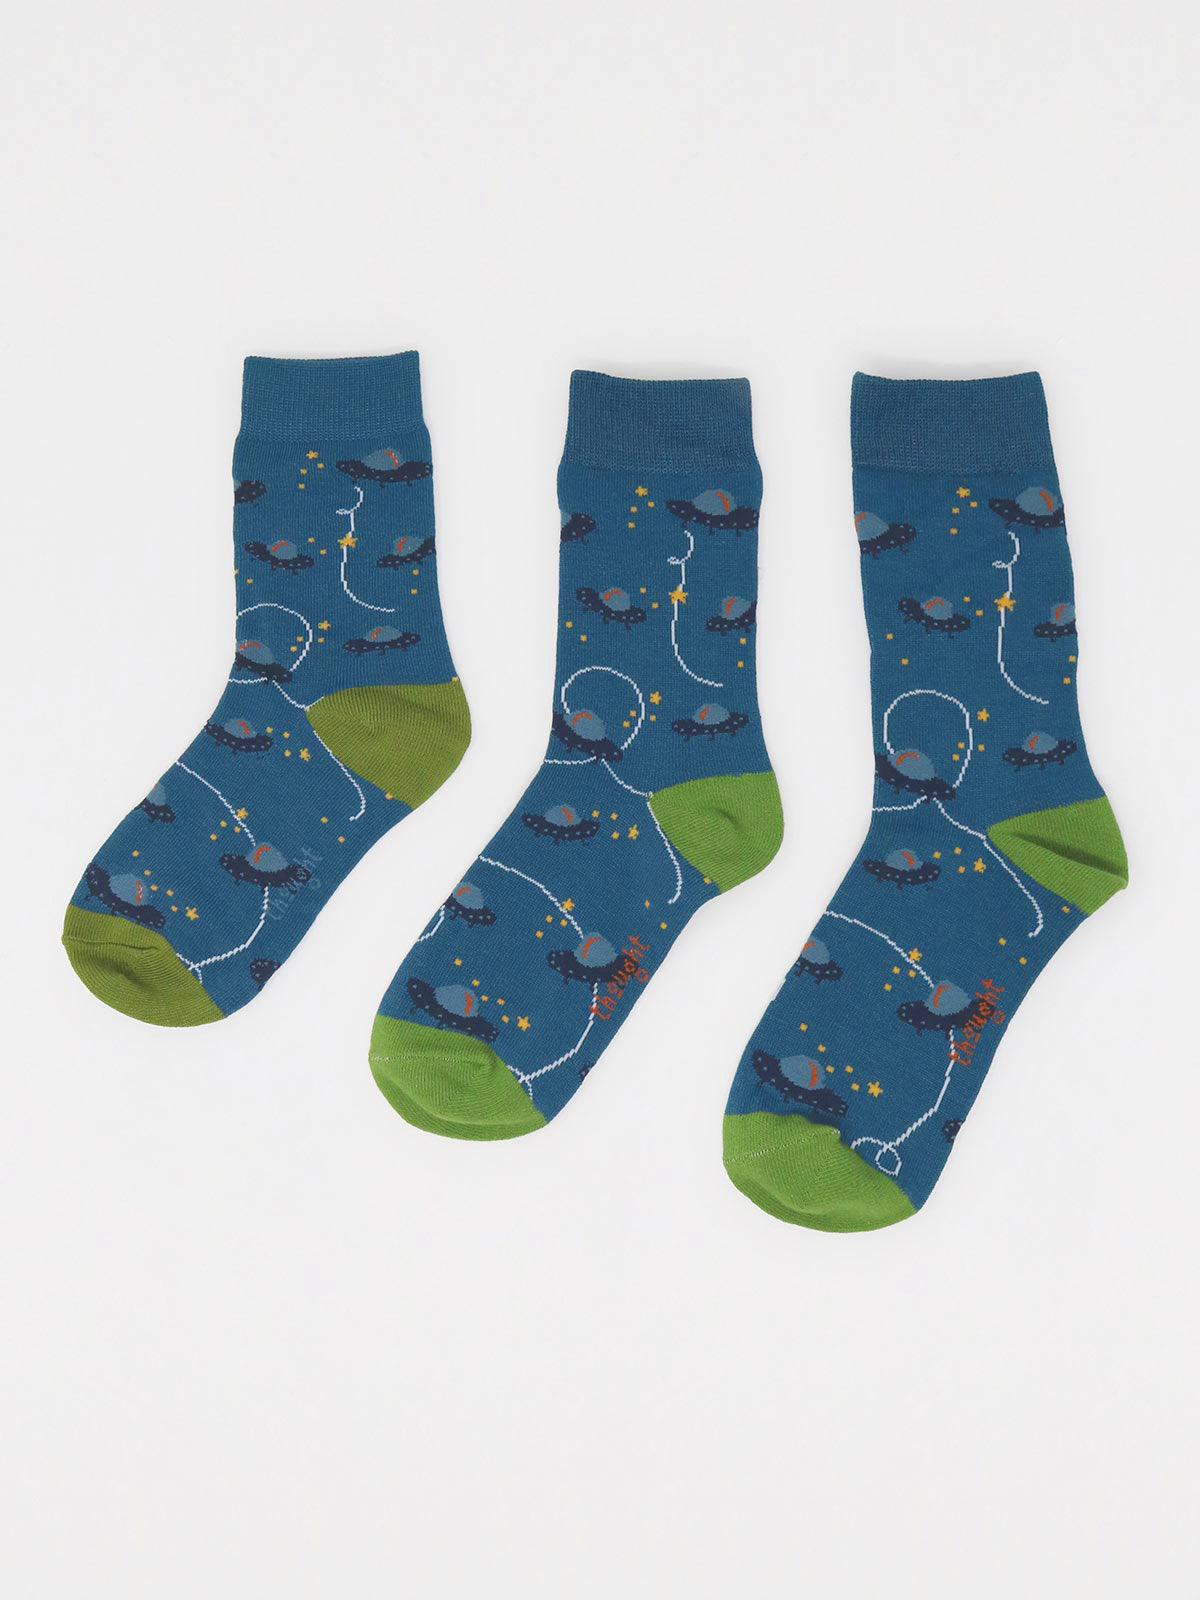 Franky Space Kids Bamboo 4 Sock Gift Box - Thought Clothing UK